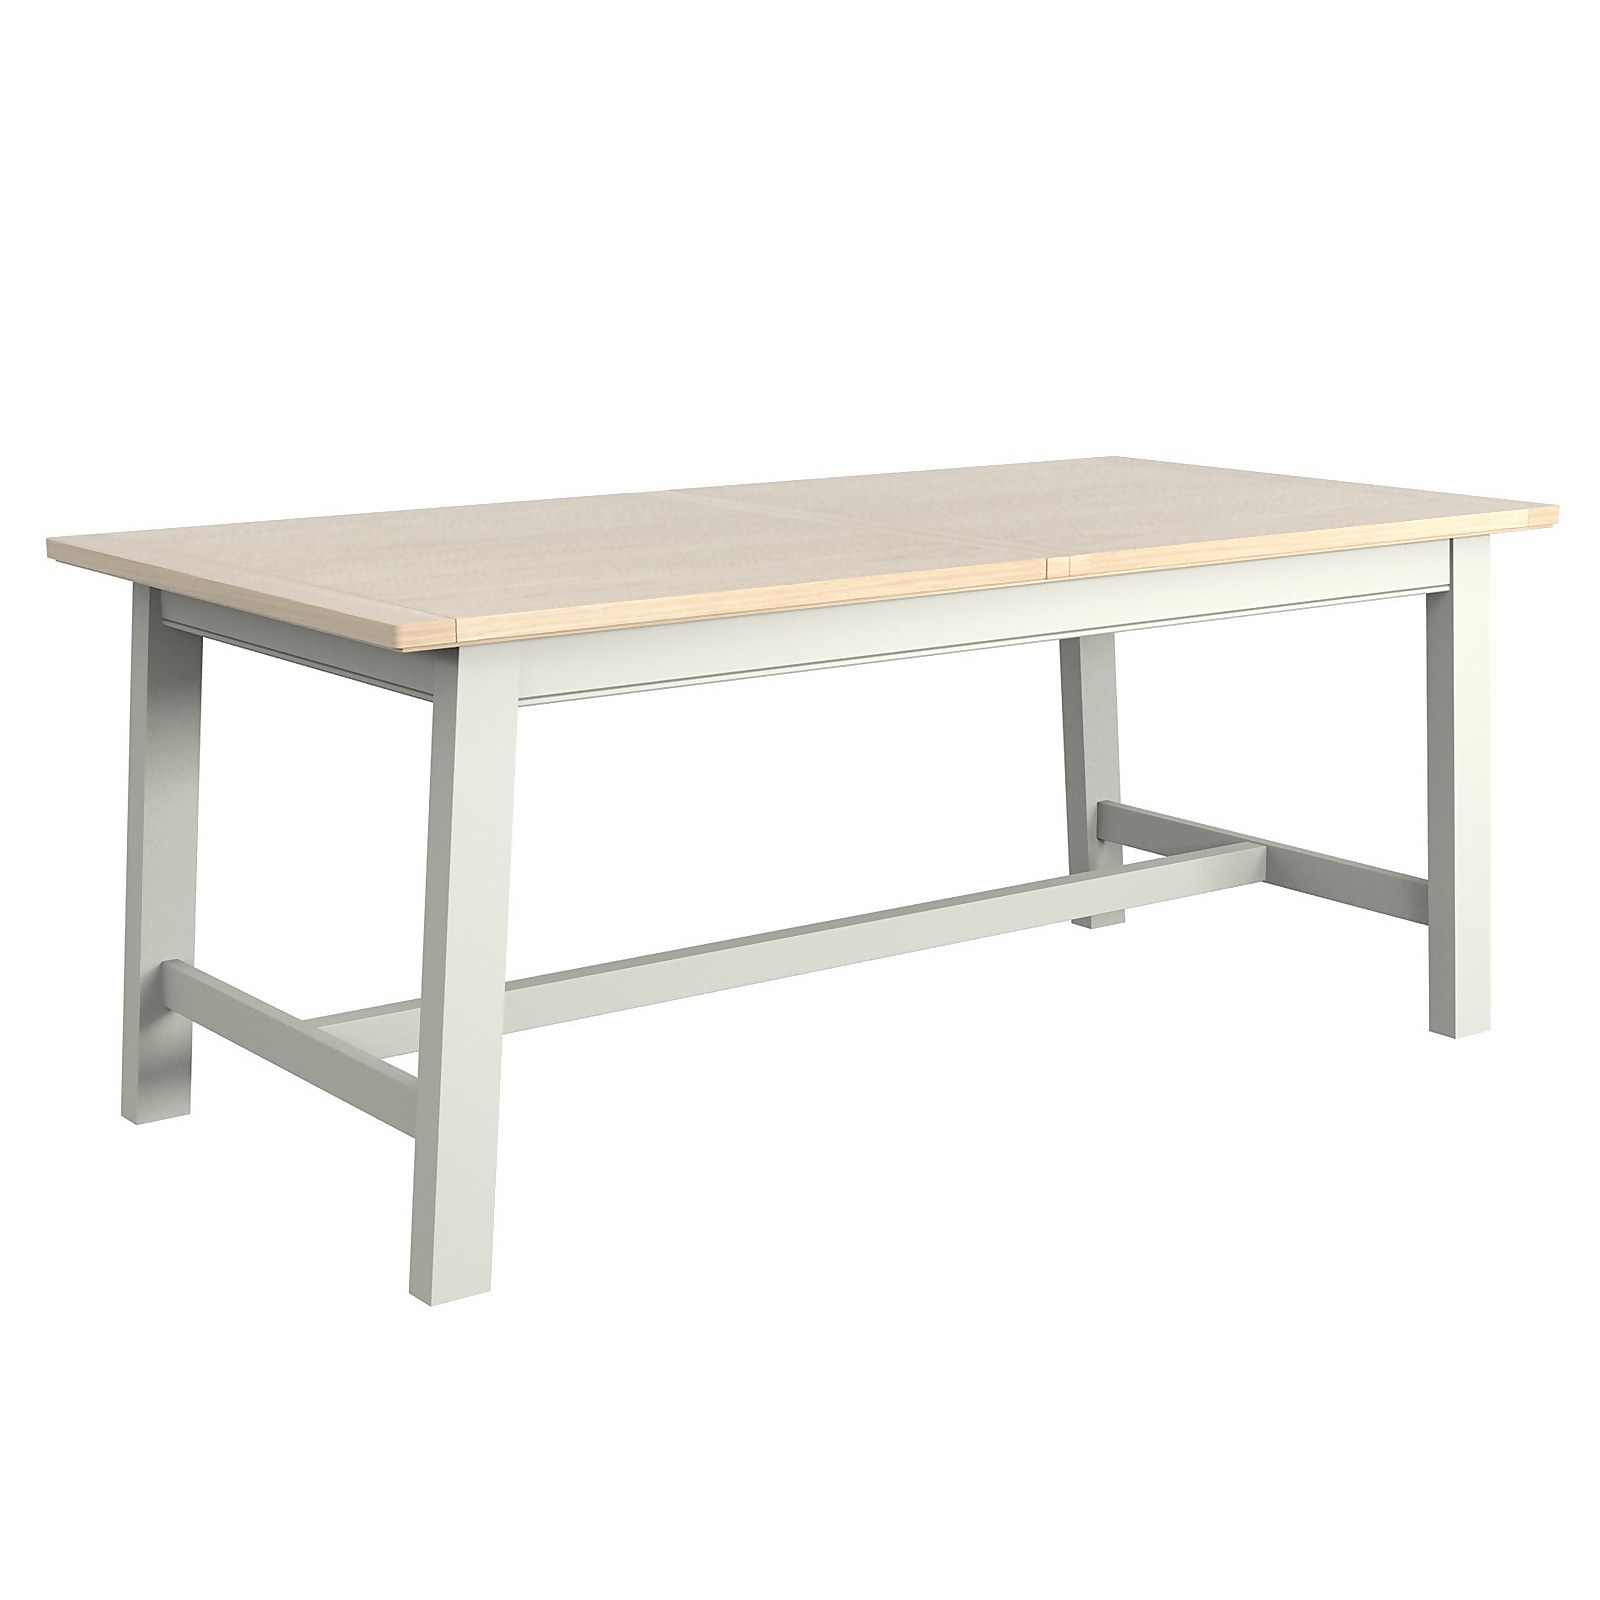 Country Living Kempton 8 to 10 Seater Extending Dining Table